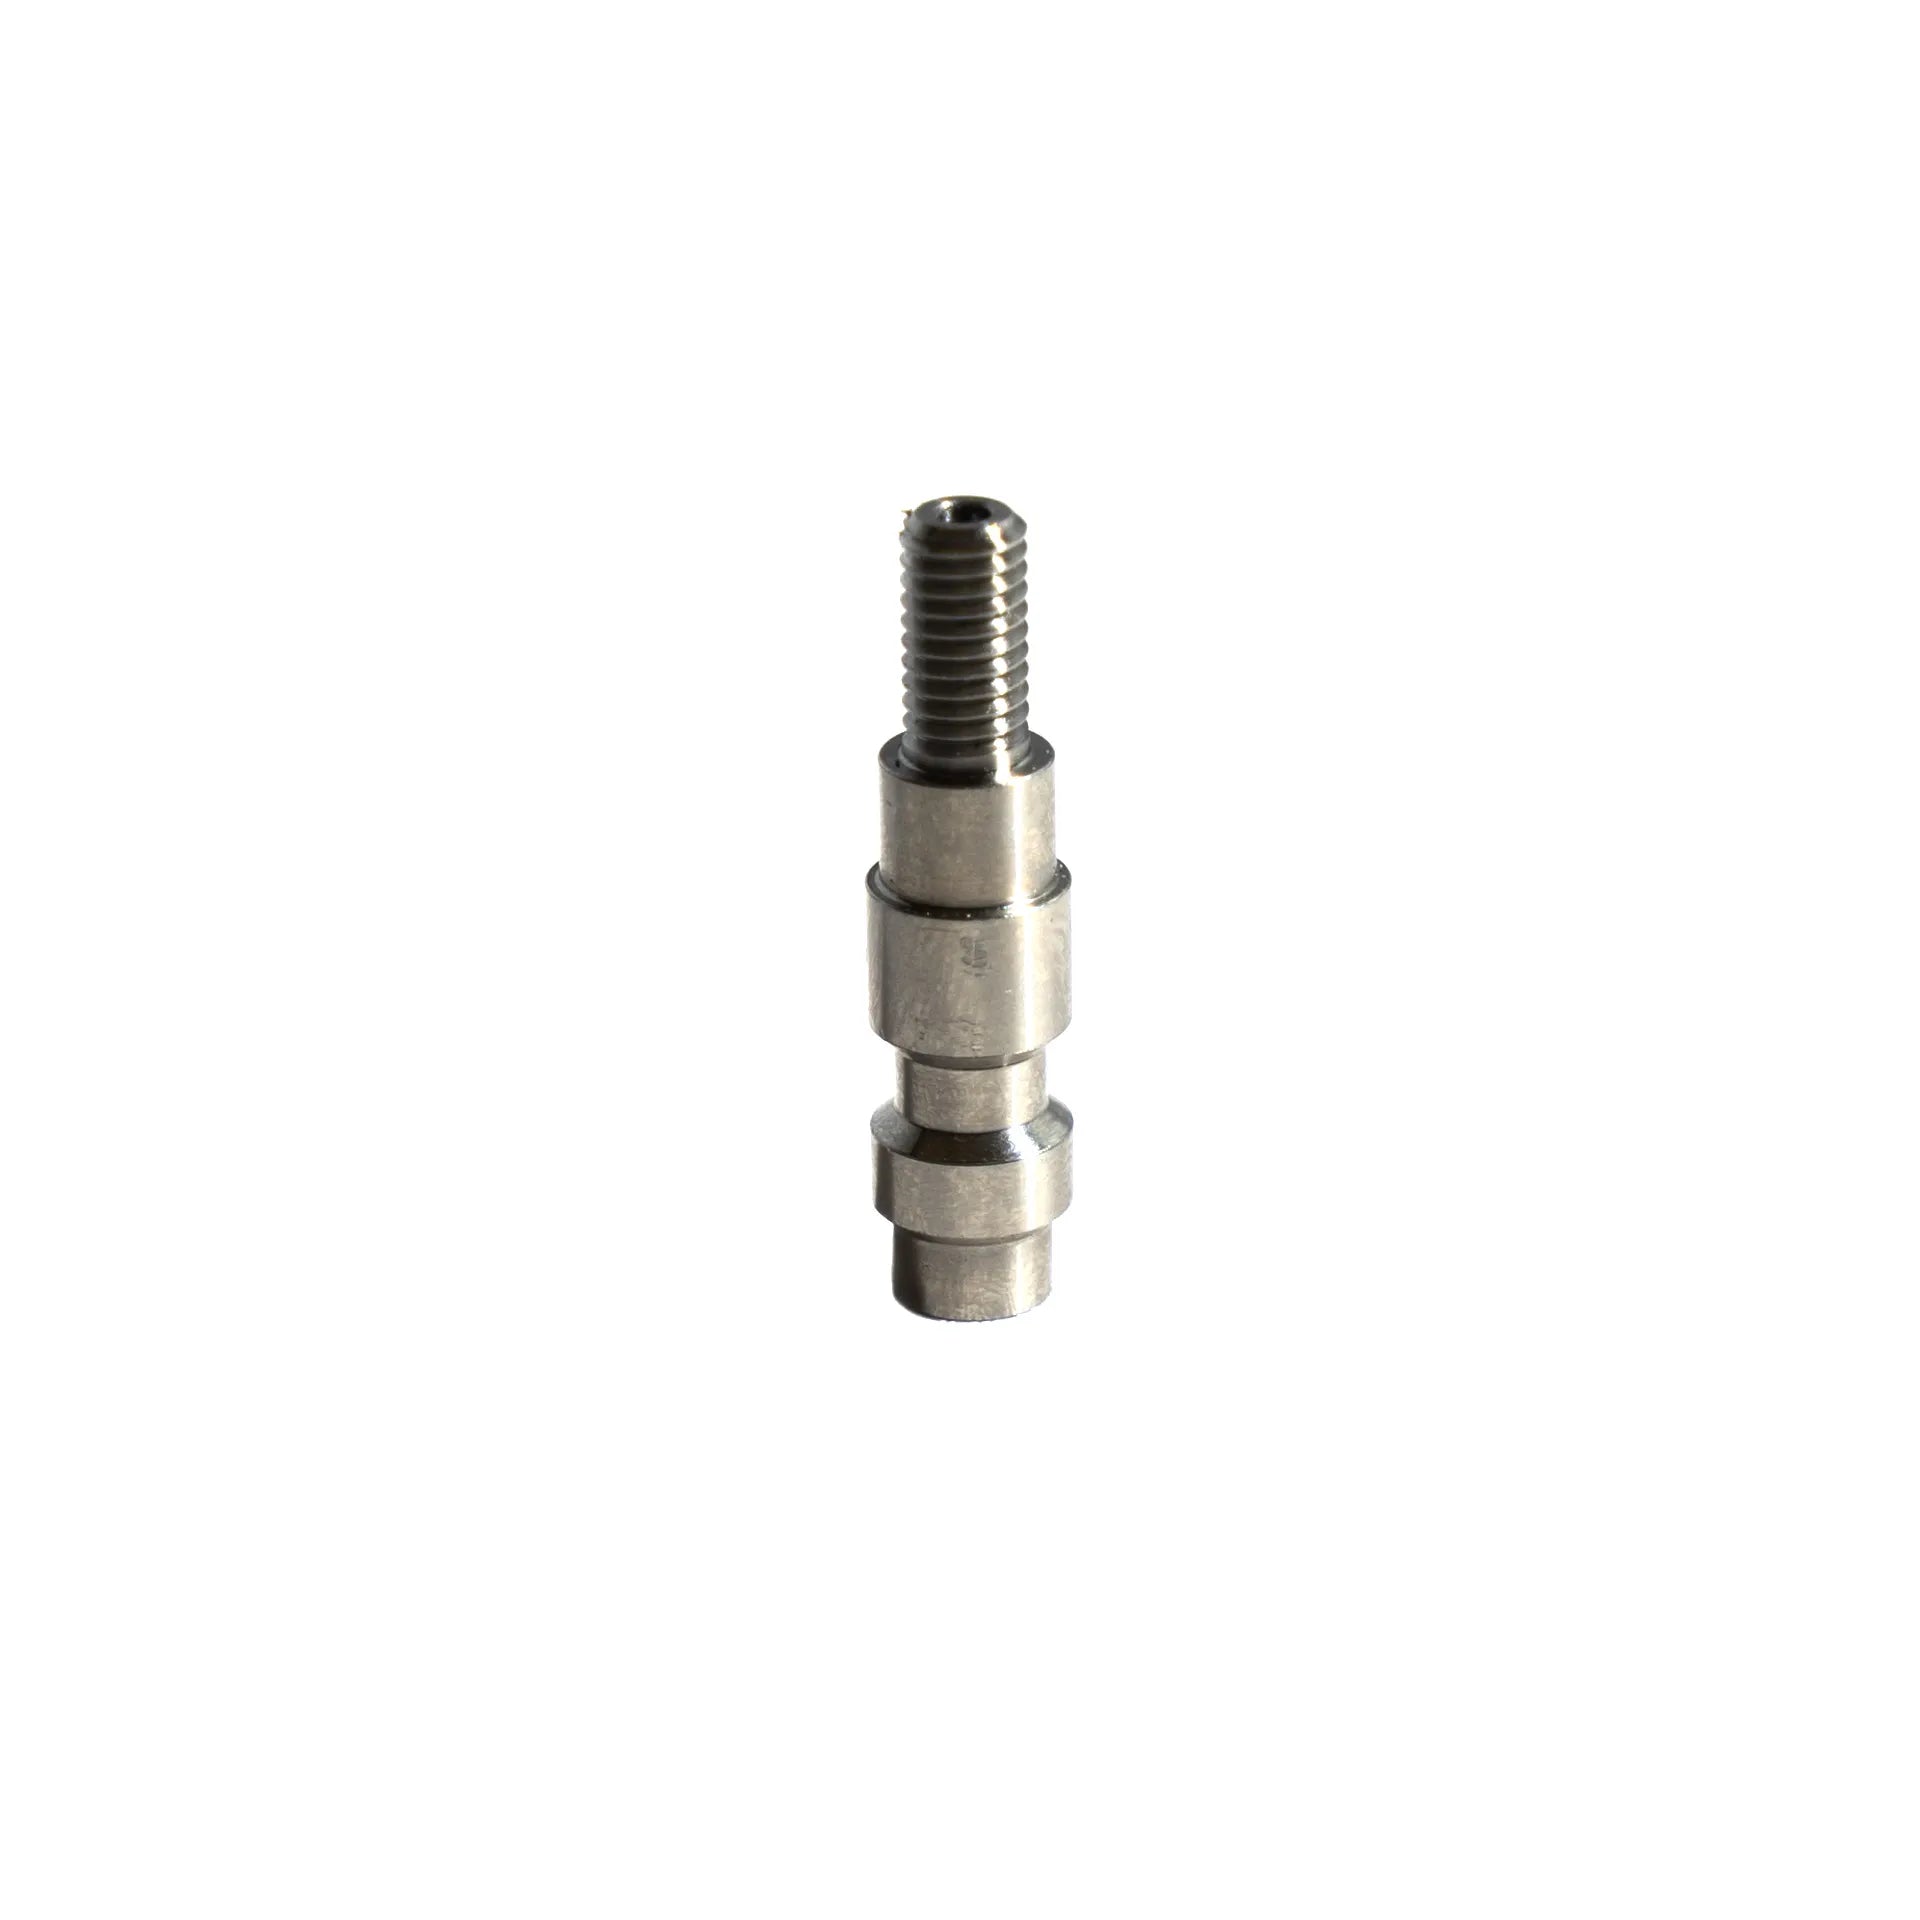 TAPP TITANIUM HPA TAP adapter FOR WE - ssairsoft.com